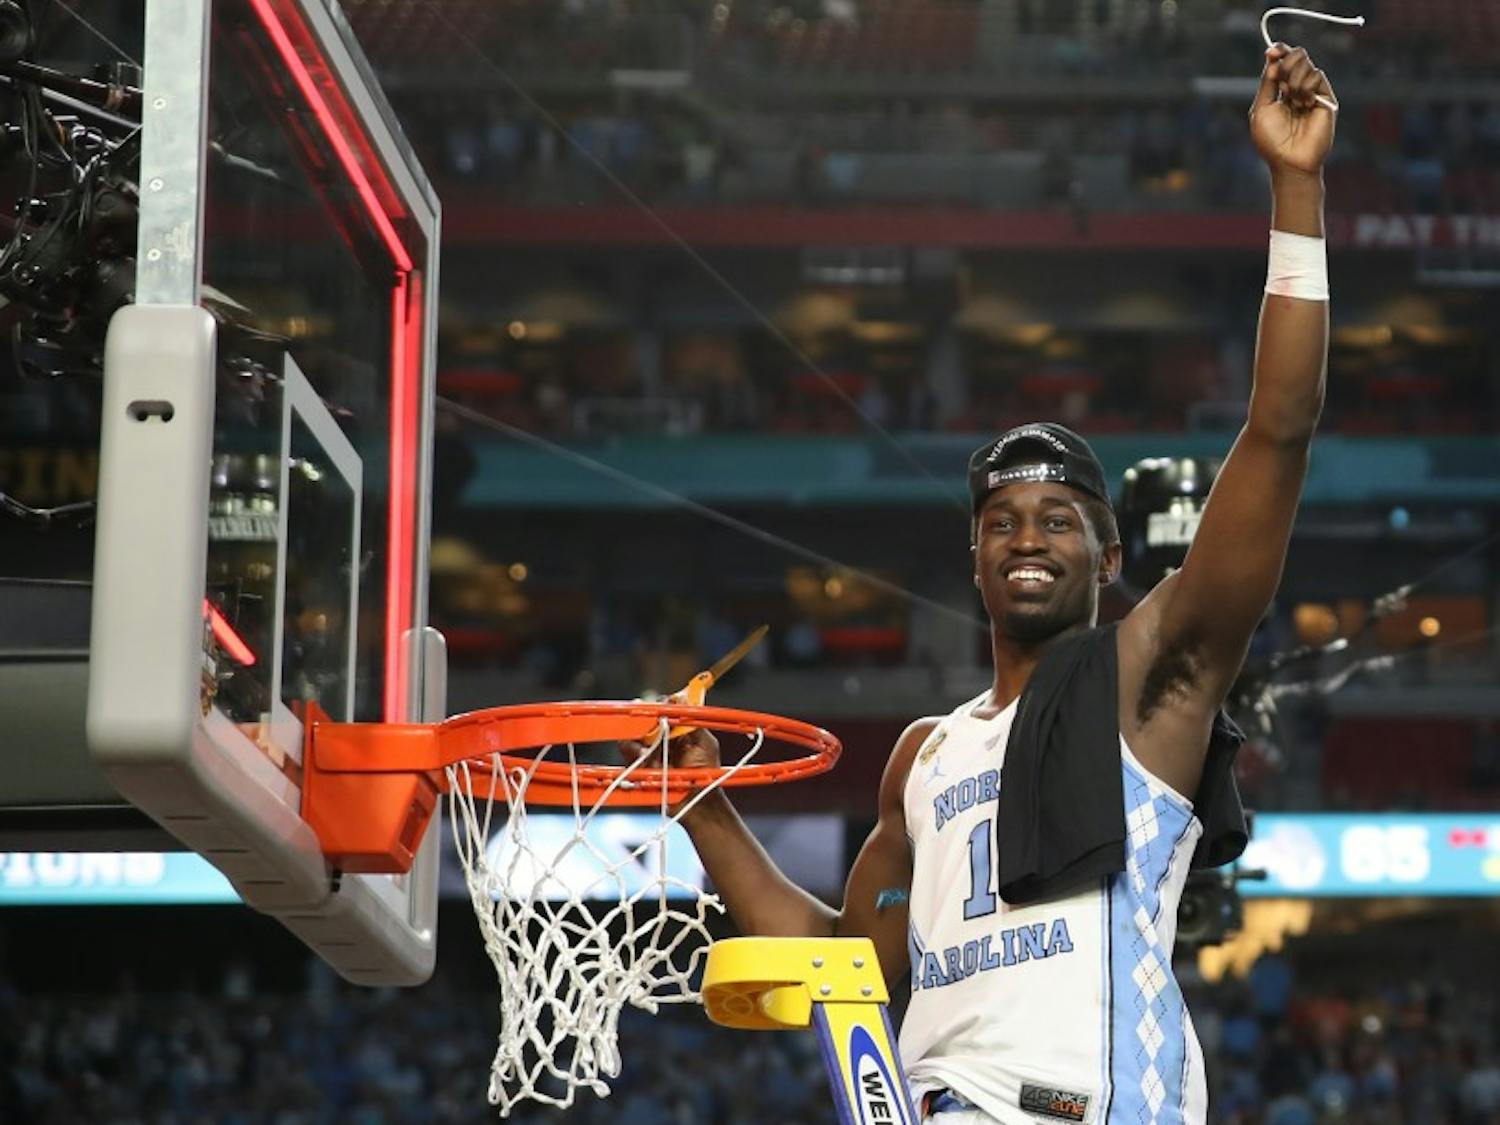 North Carolina wing Theo Pinson (1) holds up his part of the cut down net after defeating Gonzaga 71-65 in the NCAA men's basketball Championship Monday night in Phoenix.